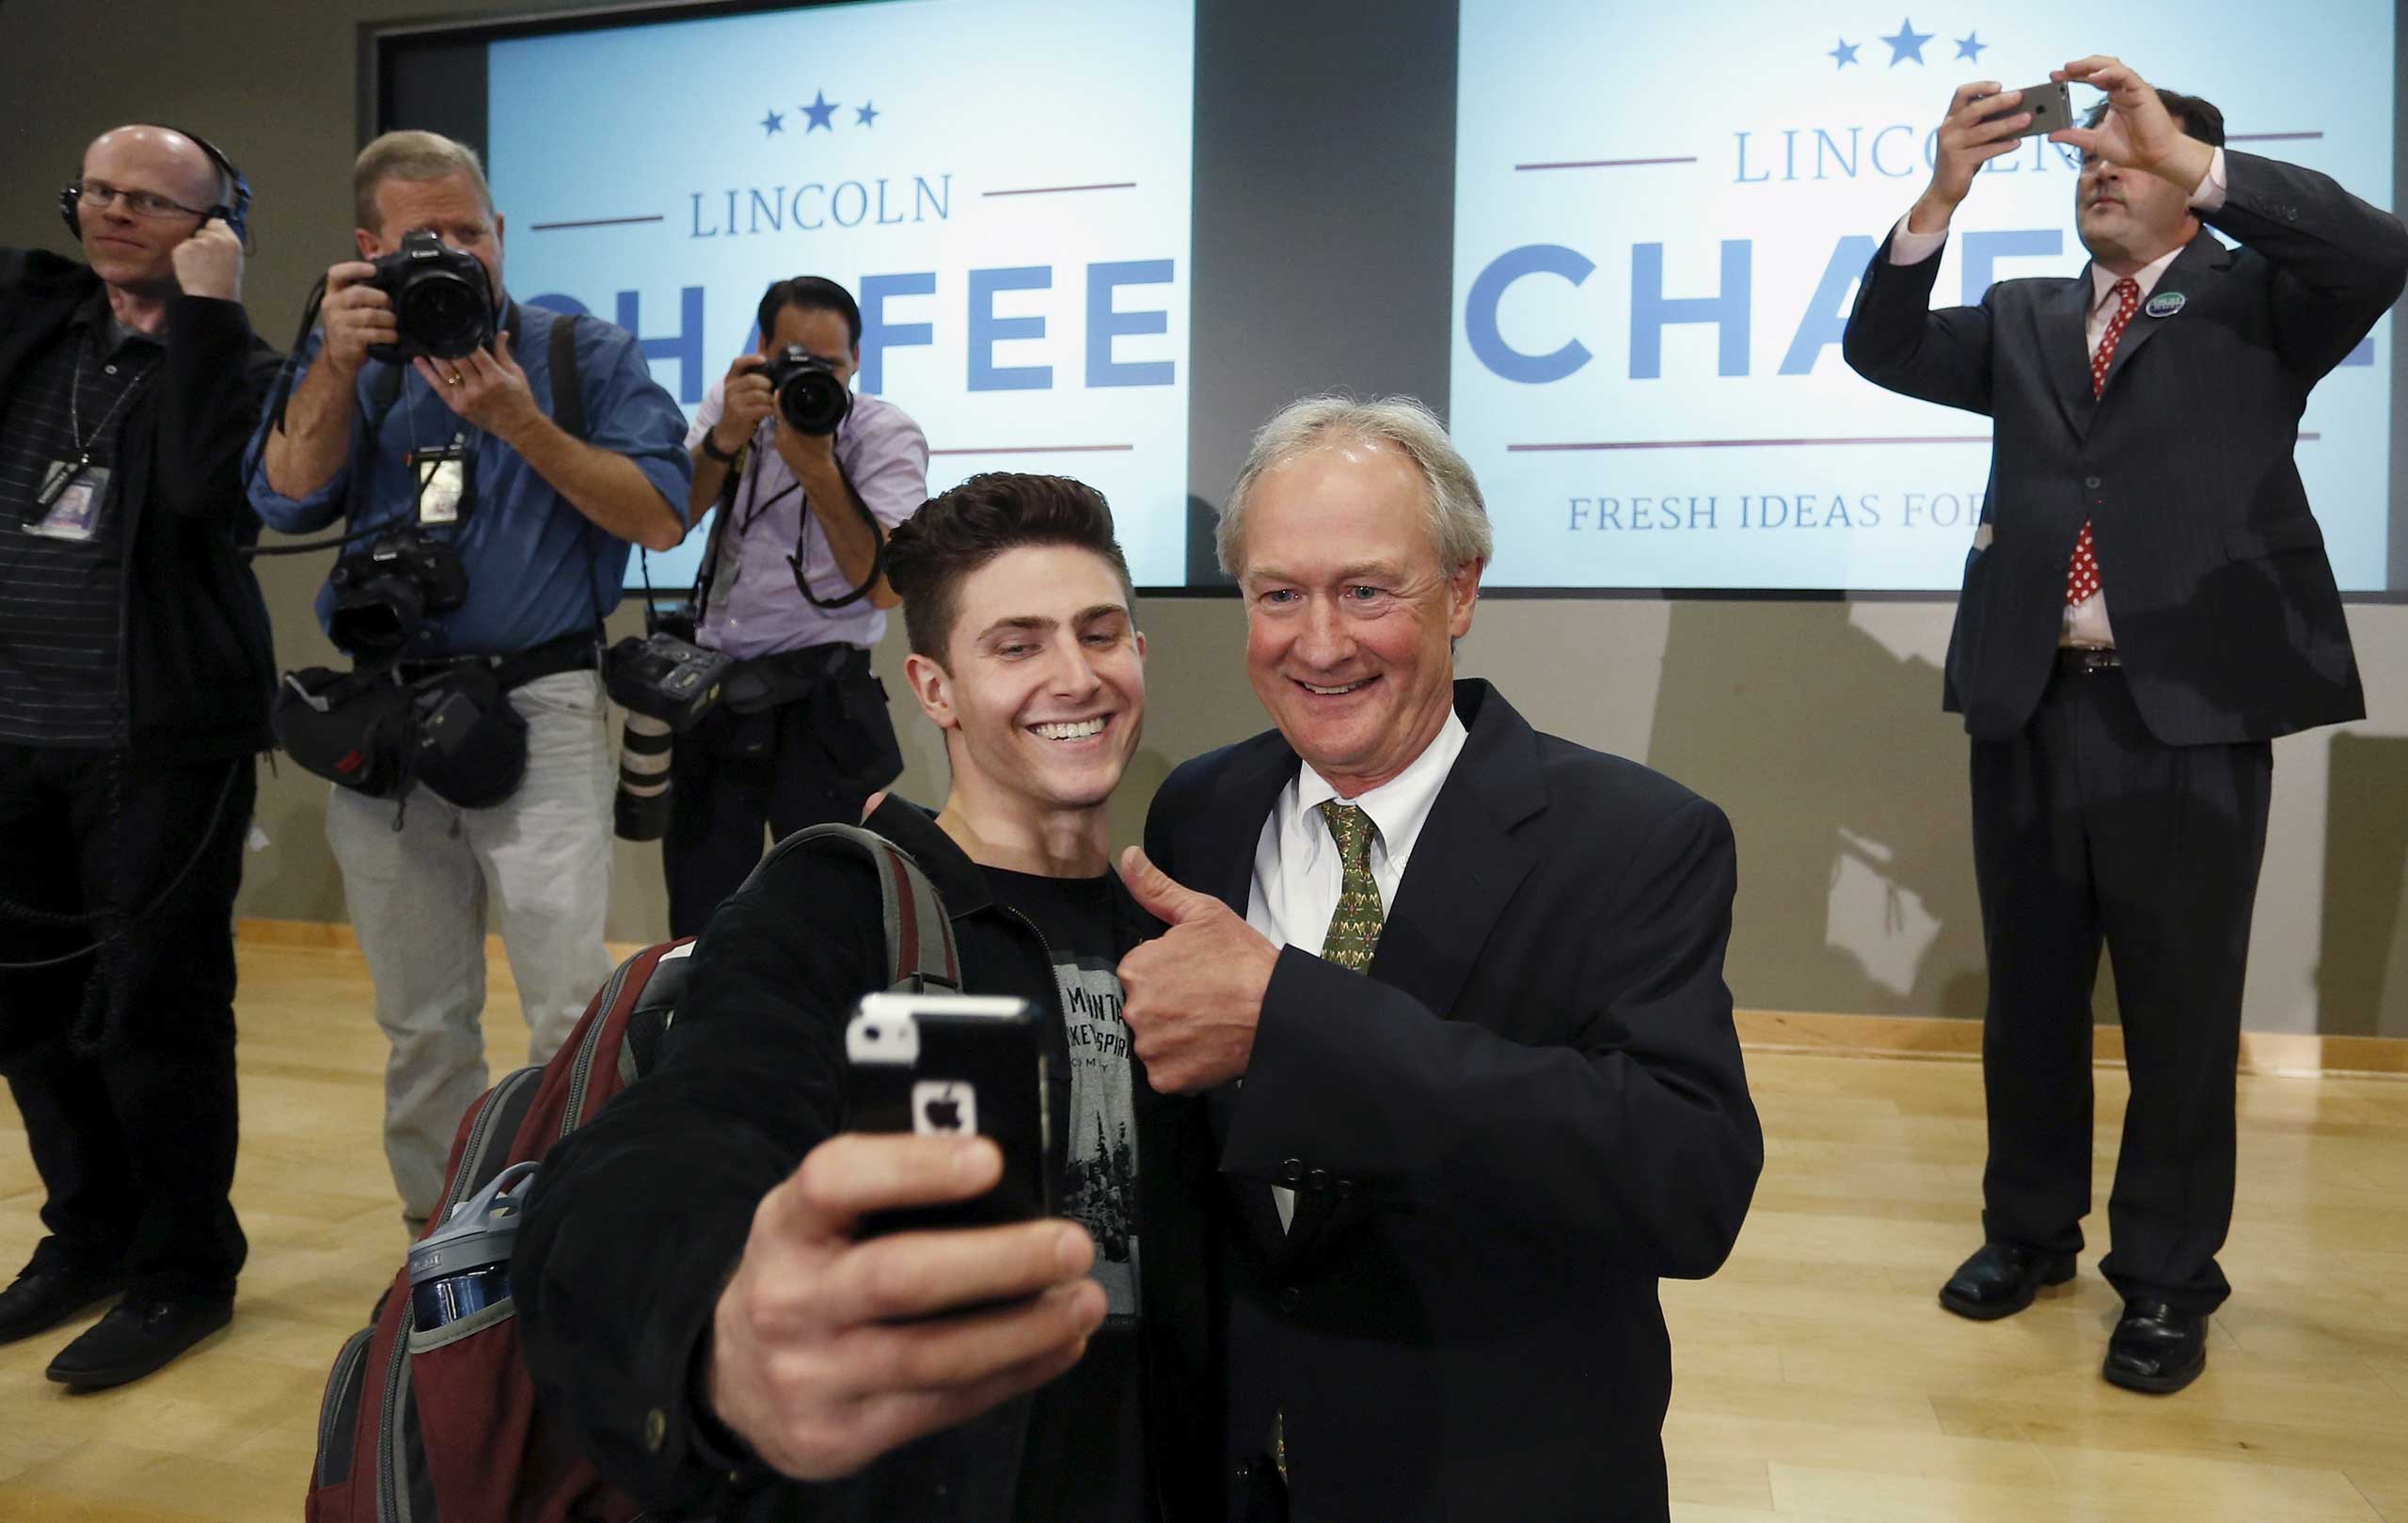 Lincoln Chafee, Former Rhode Island Governor, poses for a selfie with a student after announcing he will seek the Democratic nomination for president in Arlington, Va. on June 3, 2015.